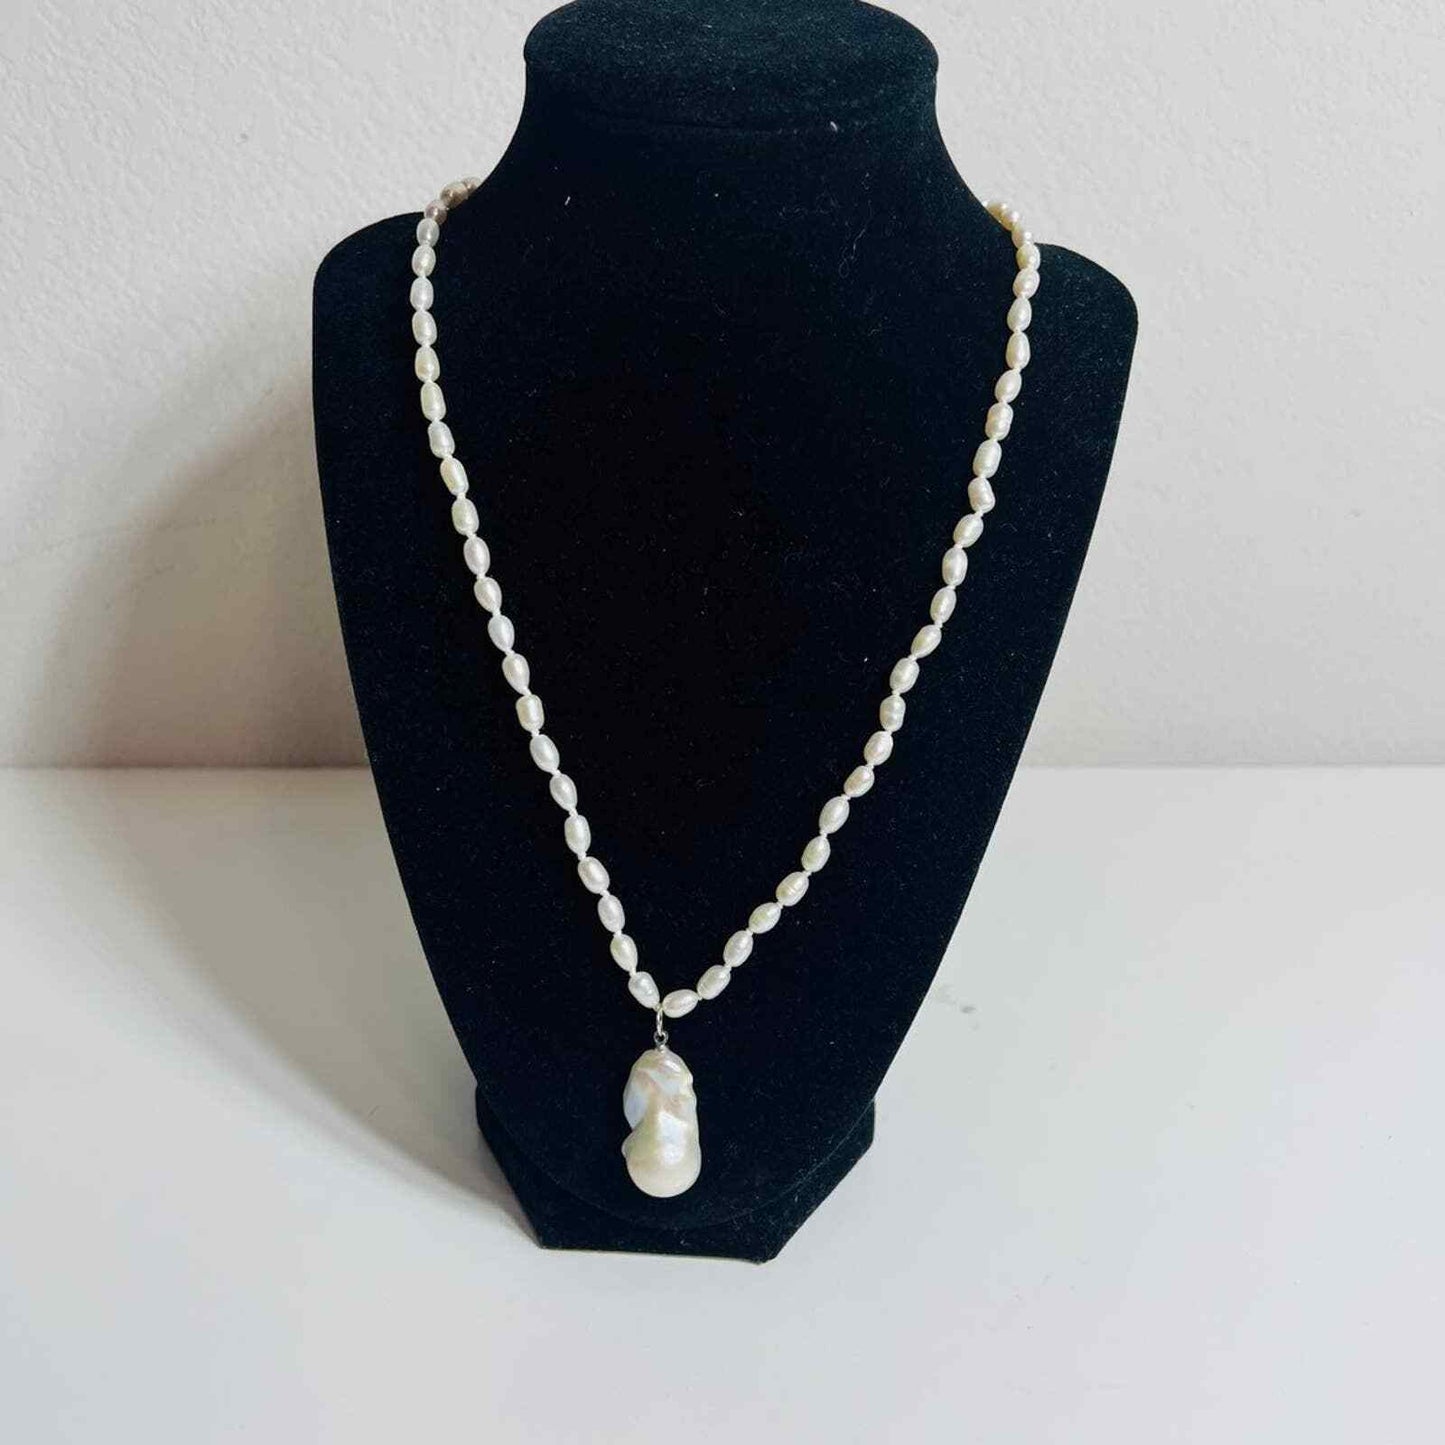 Baroque Pearl Pendant Freshwater Pearl Necklace Natural M&M 24" long Jewelry